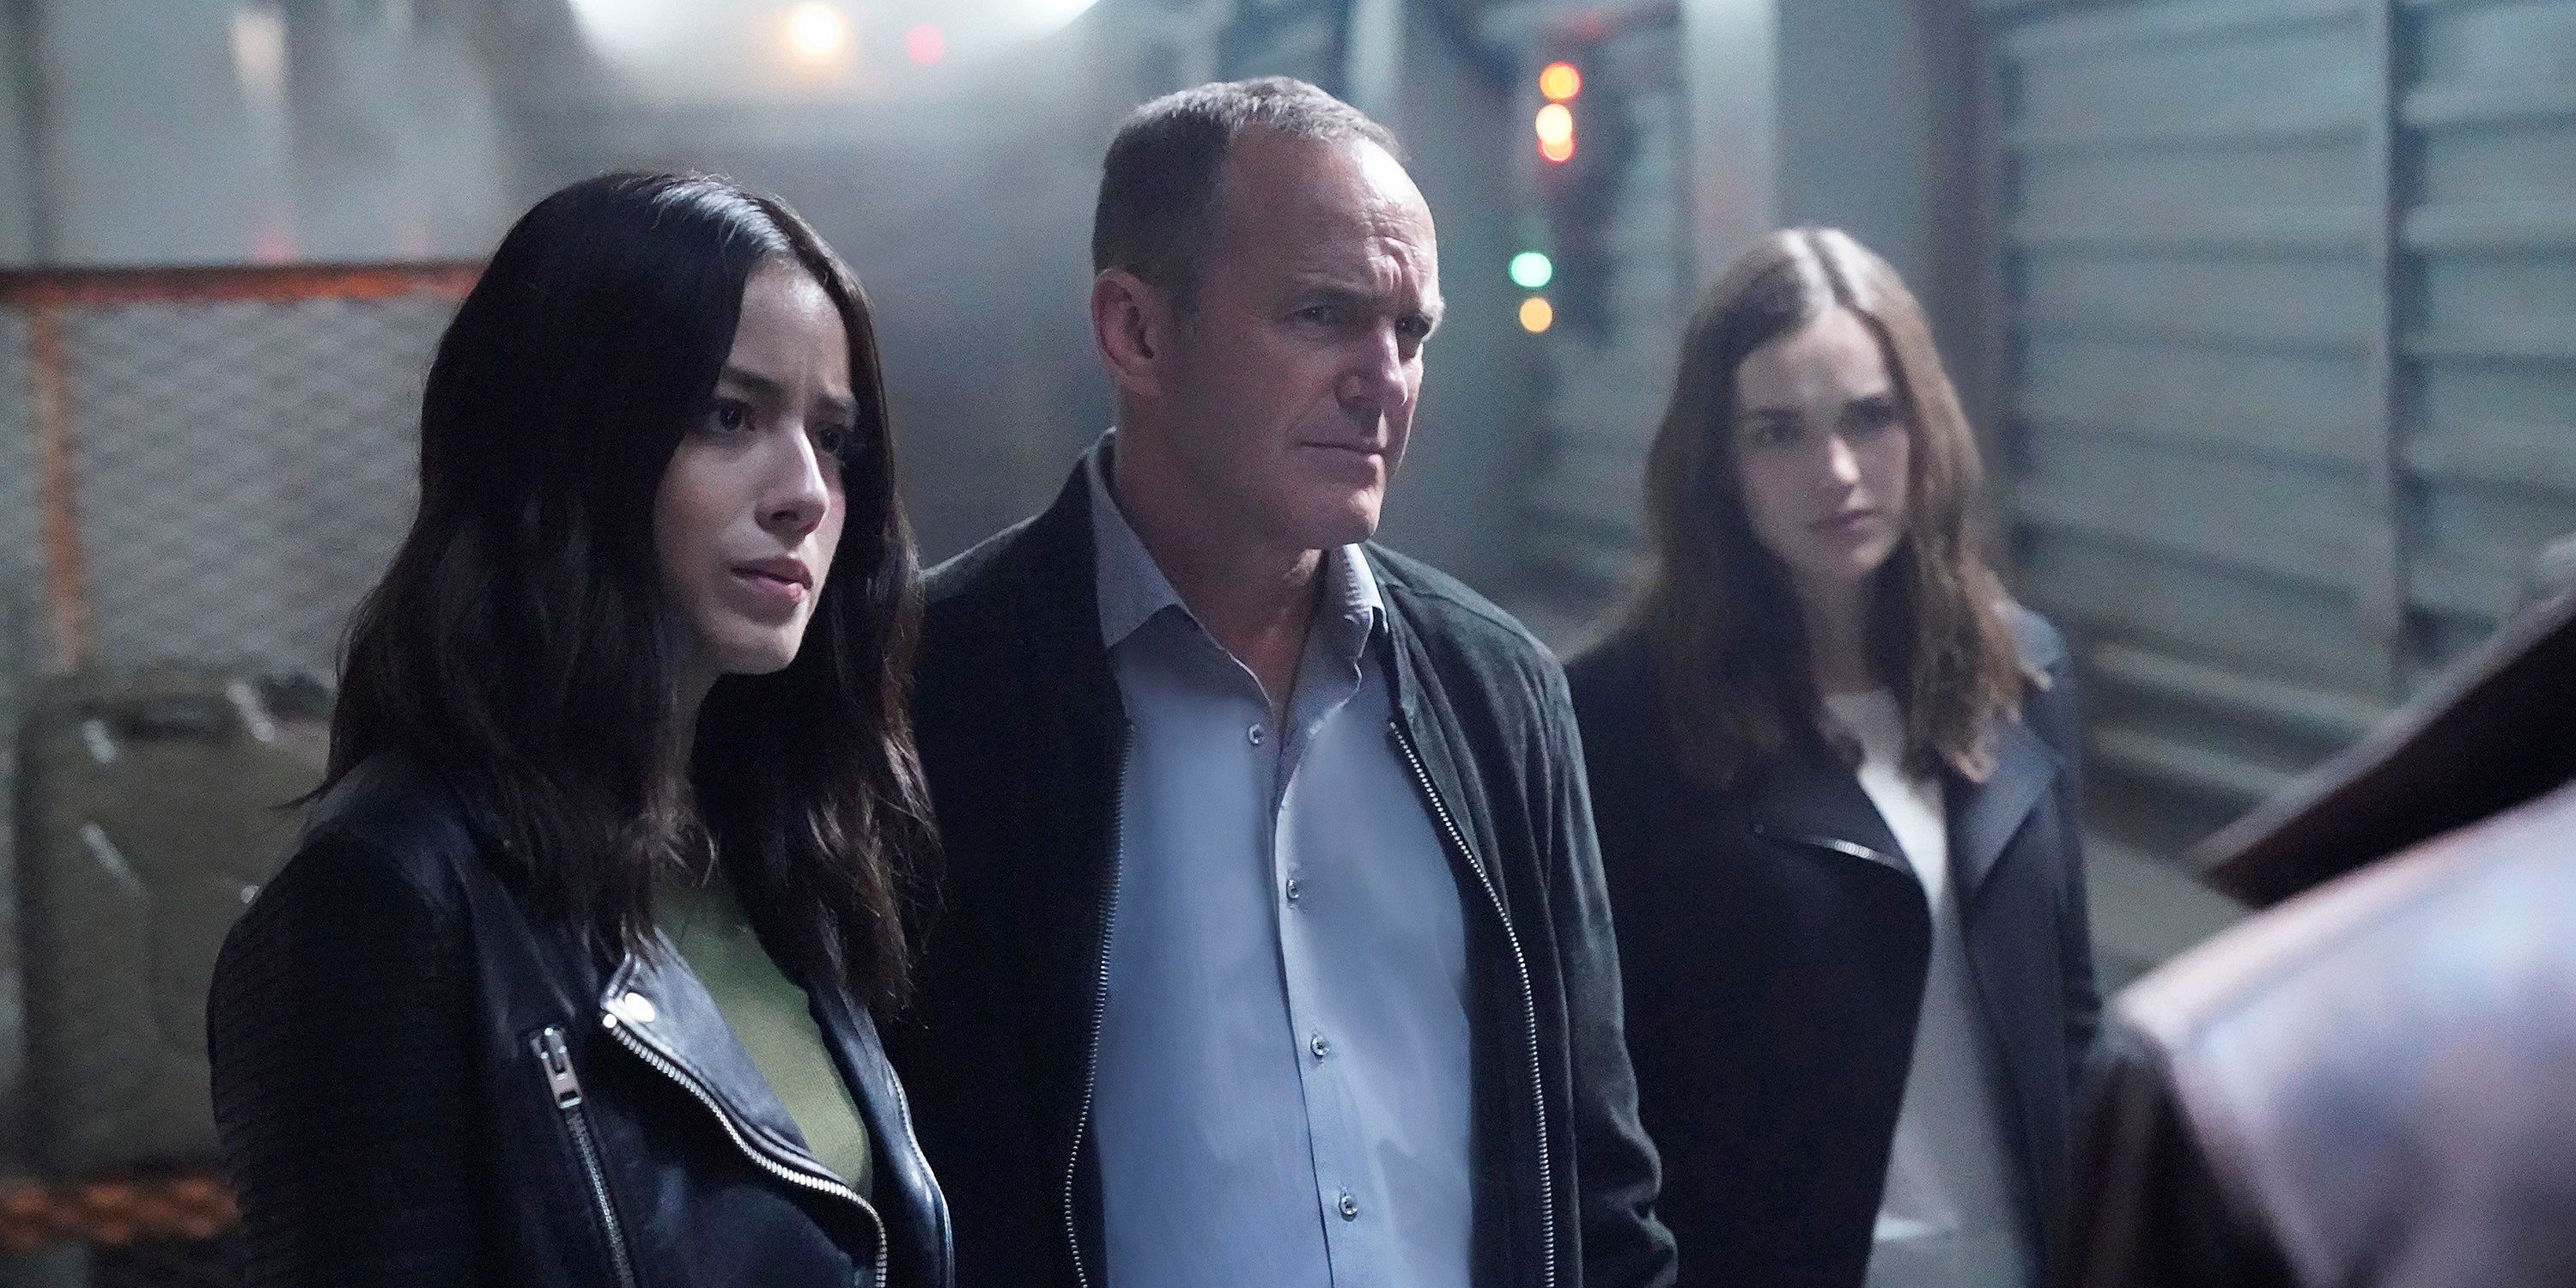 Chloe Bennet as Daisy Quake Johnson, Clark Gregg as Phil Coulson and Elizabeth Henstridge as Jemma Simmons in Agents of SHIELD